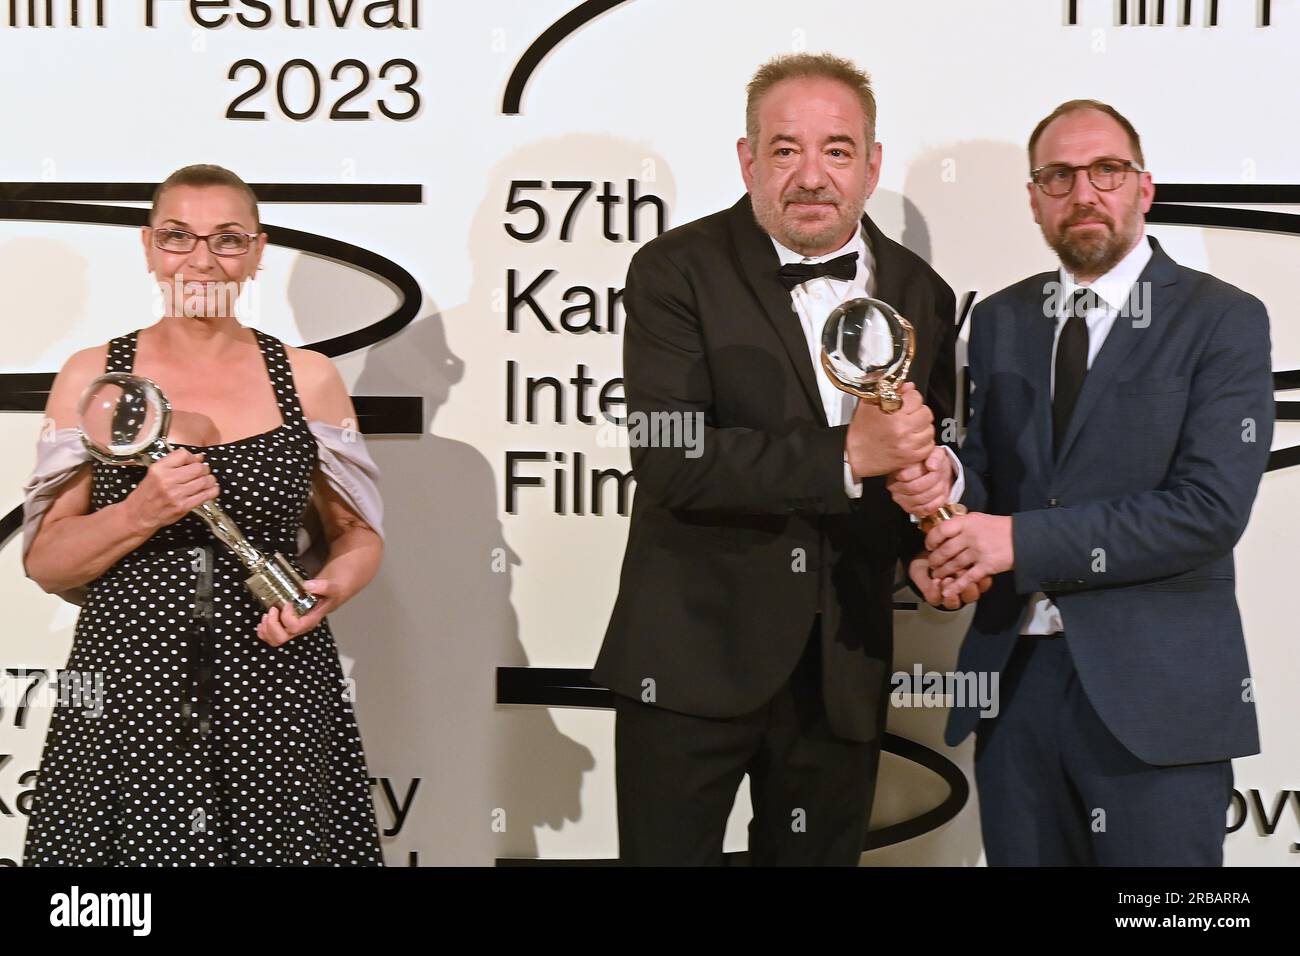 Karlovy Vary, Czech Republic. 08th July, 2023. The last day of the 57th Karlovy Vary International Film Festival, 8 July 2023. Bulgarian actress Eli Skorcheva receives the award for Best Actress for her role in the film Blaziny lekce at the closing ceremony. From left: actress Eli Skorcheva and director Stephan Komandarev. Credit: Slavomir Kubes/CTK Photo/Alamy Live News Stock Photo